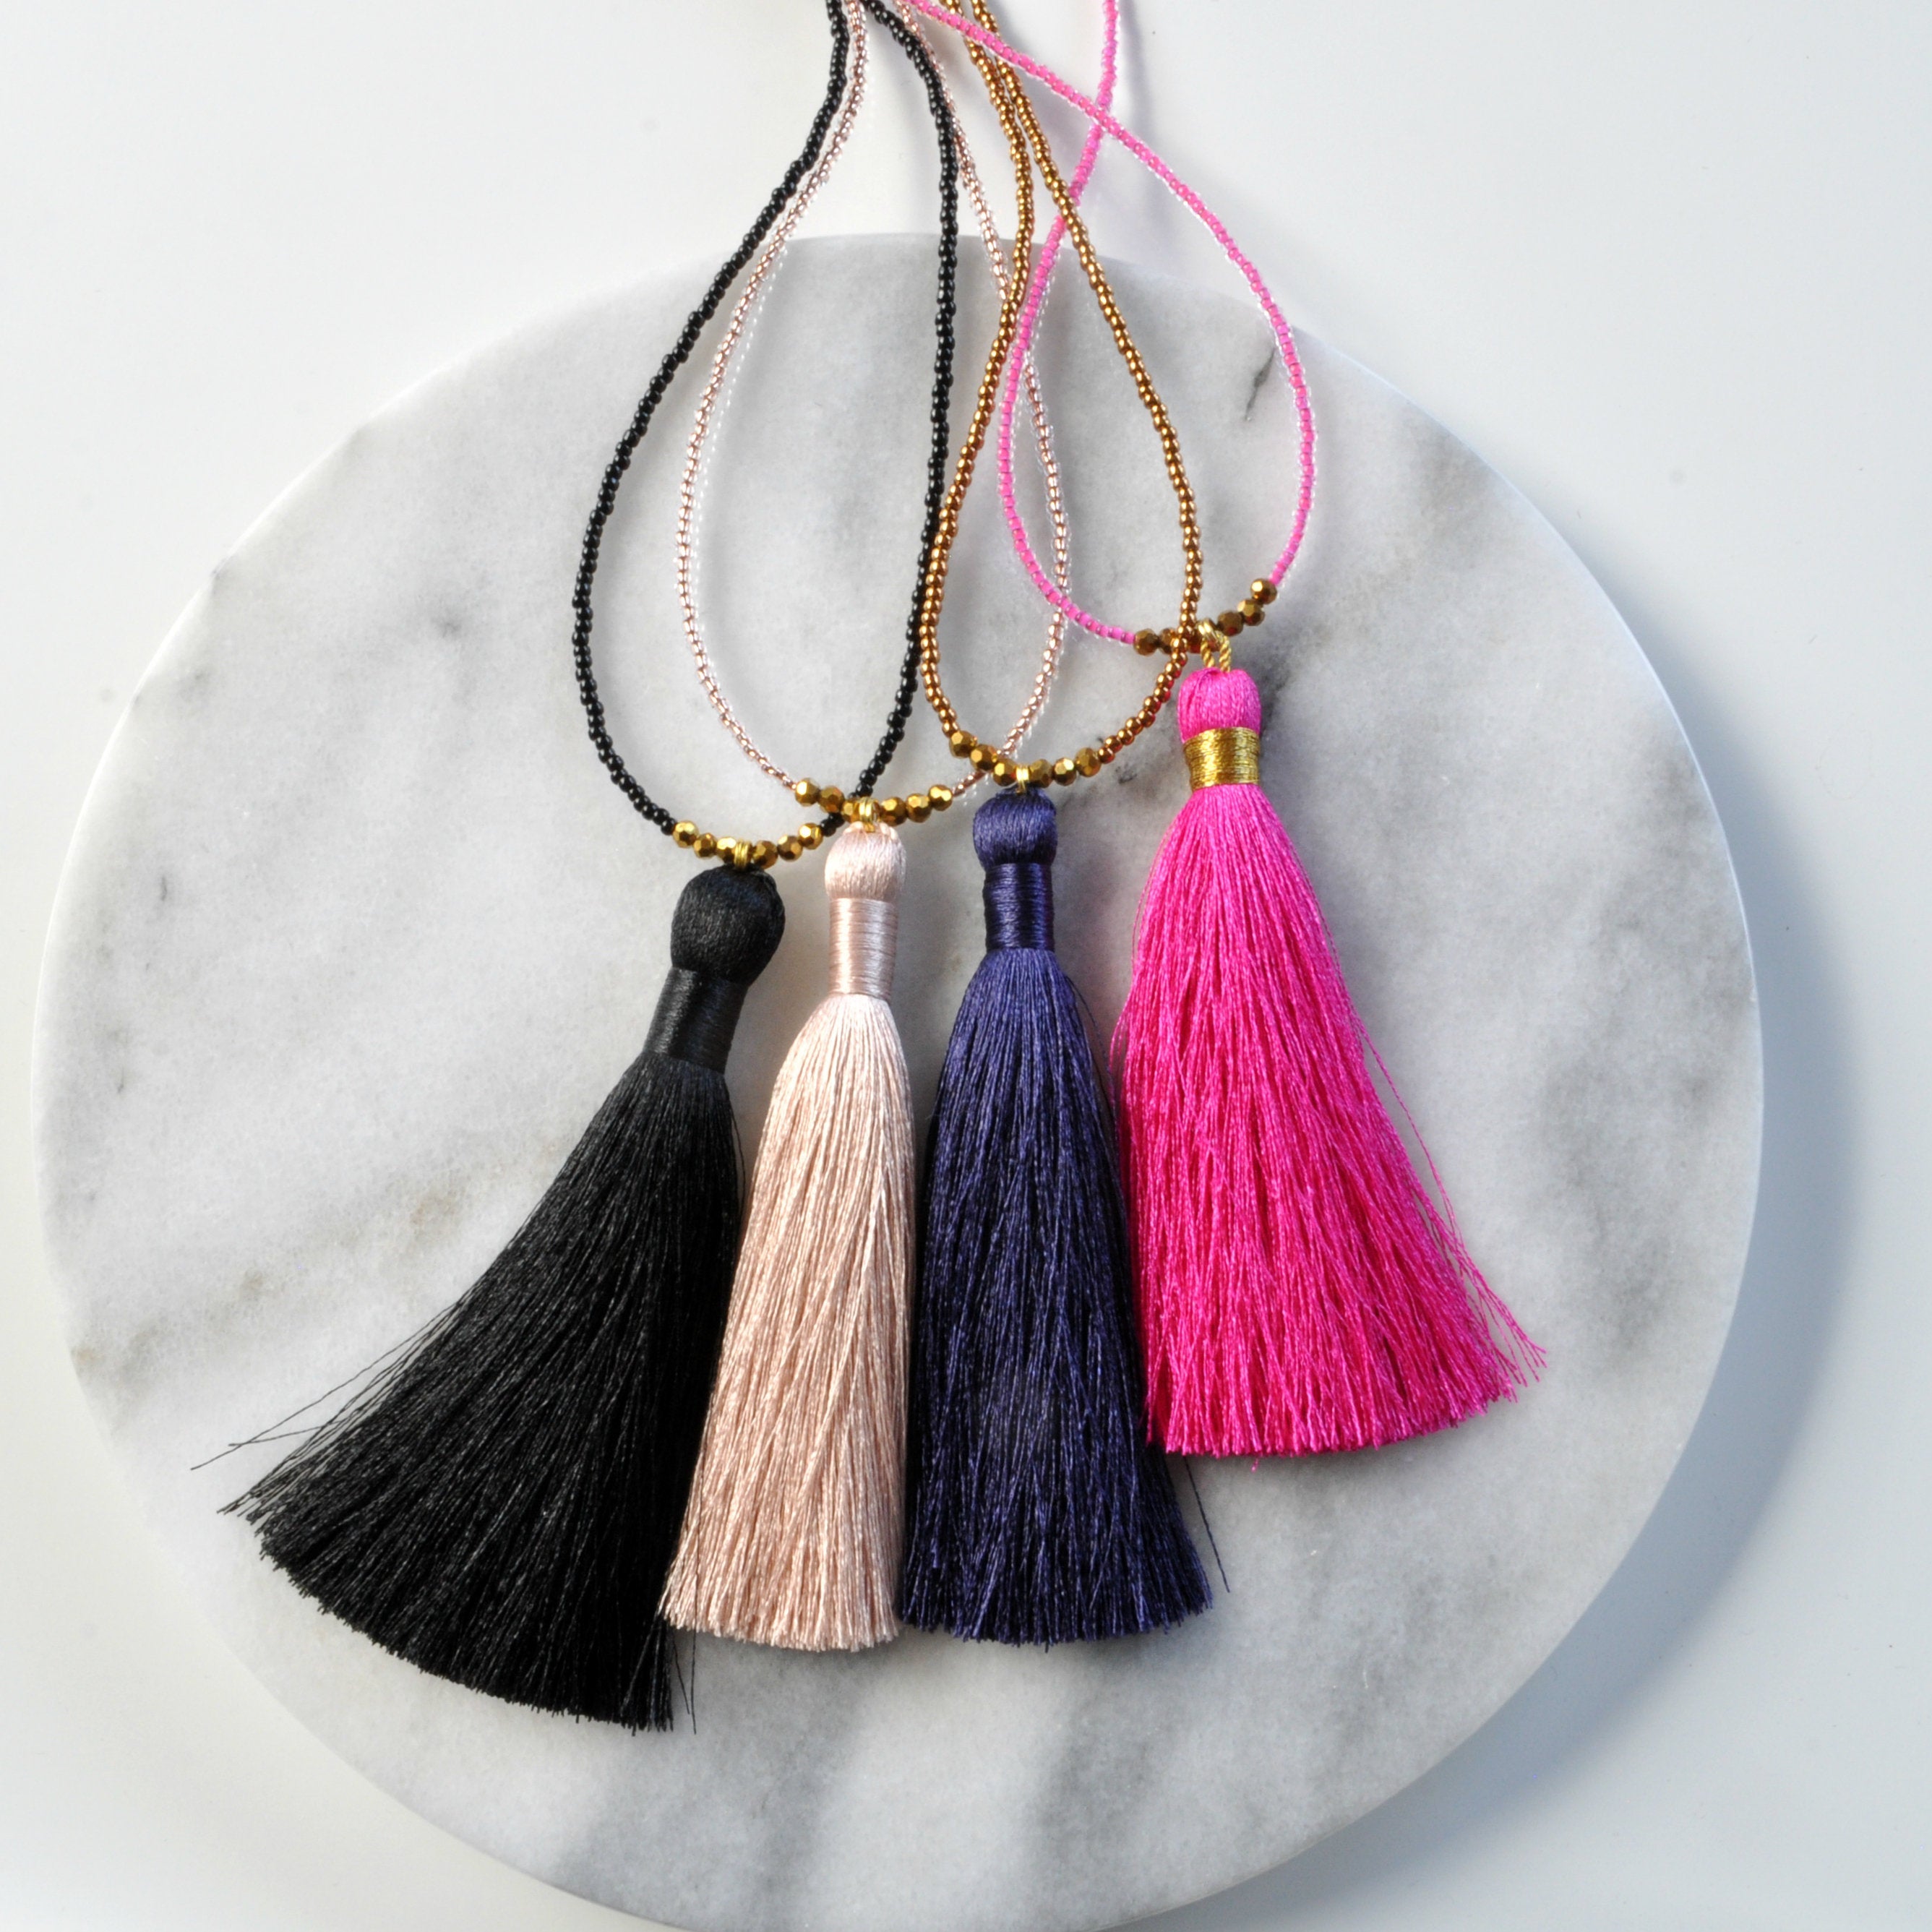 Libby & Smee Beaded Tassel Necklace in Black, Champagne, Navy and Fuchsia, still life